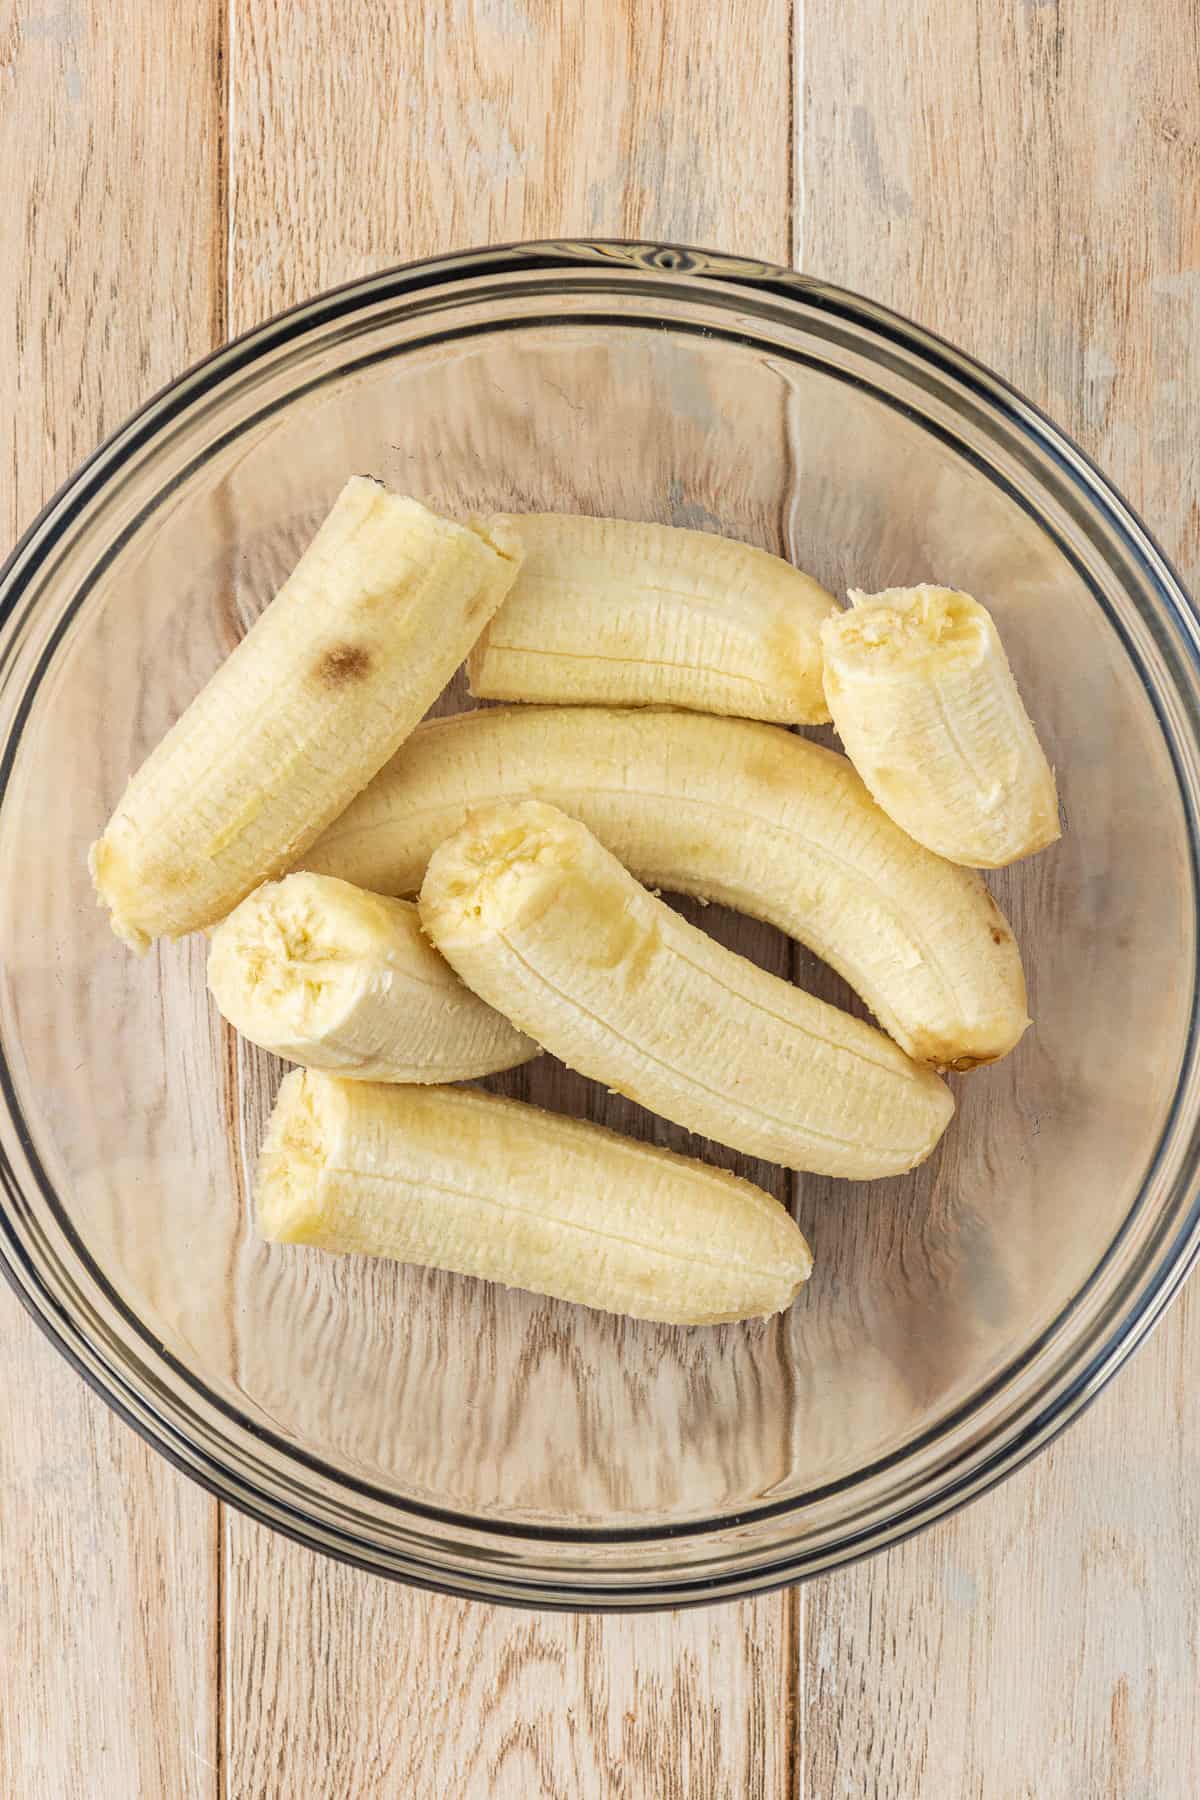 a glass bowl full of banana halves on a wood surface